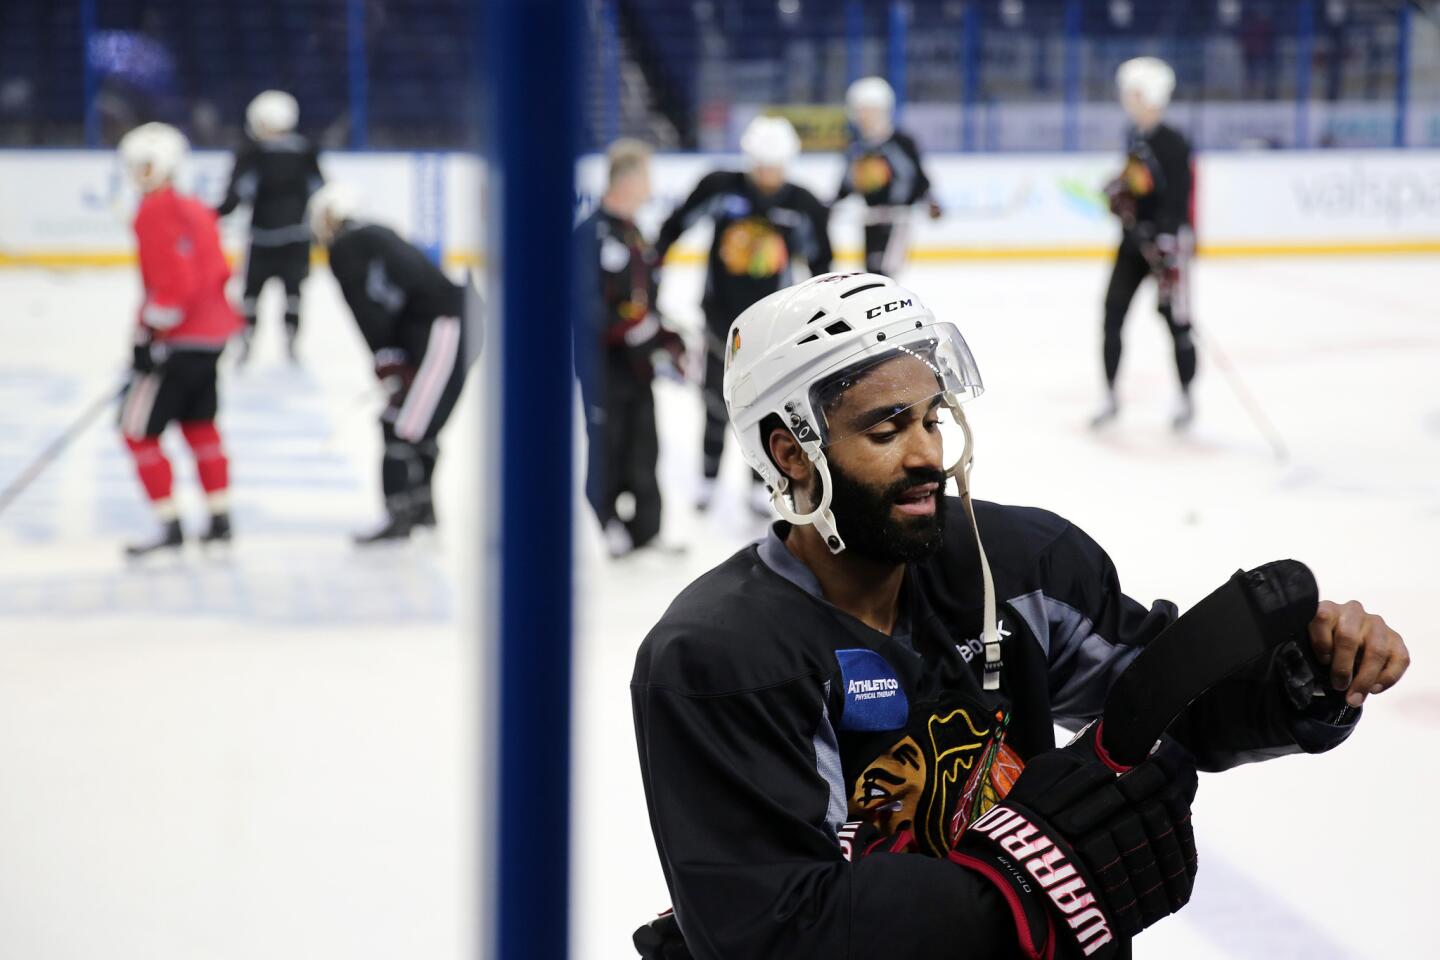 Johnny Oduya pulls tape off his stick during practice.